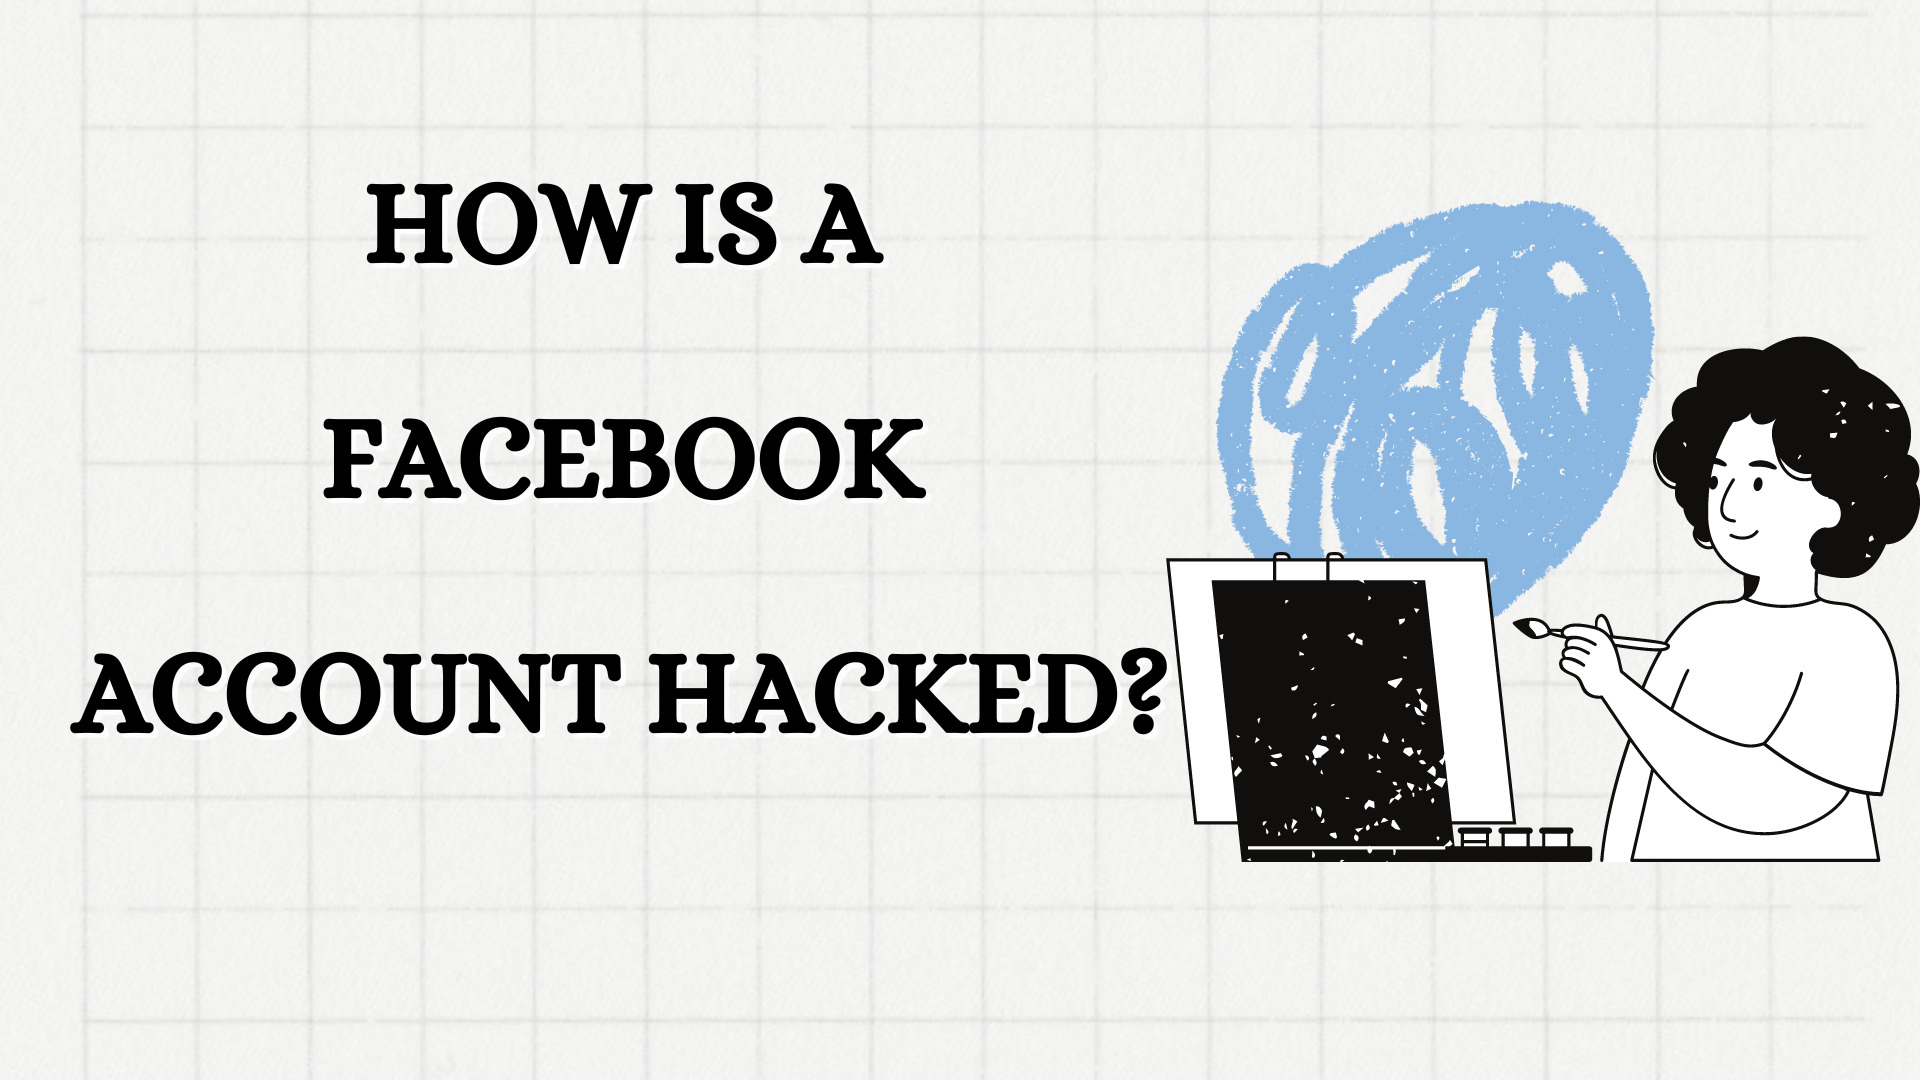 How is a Facebook account hacked?